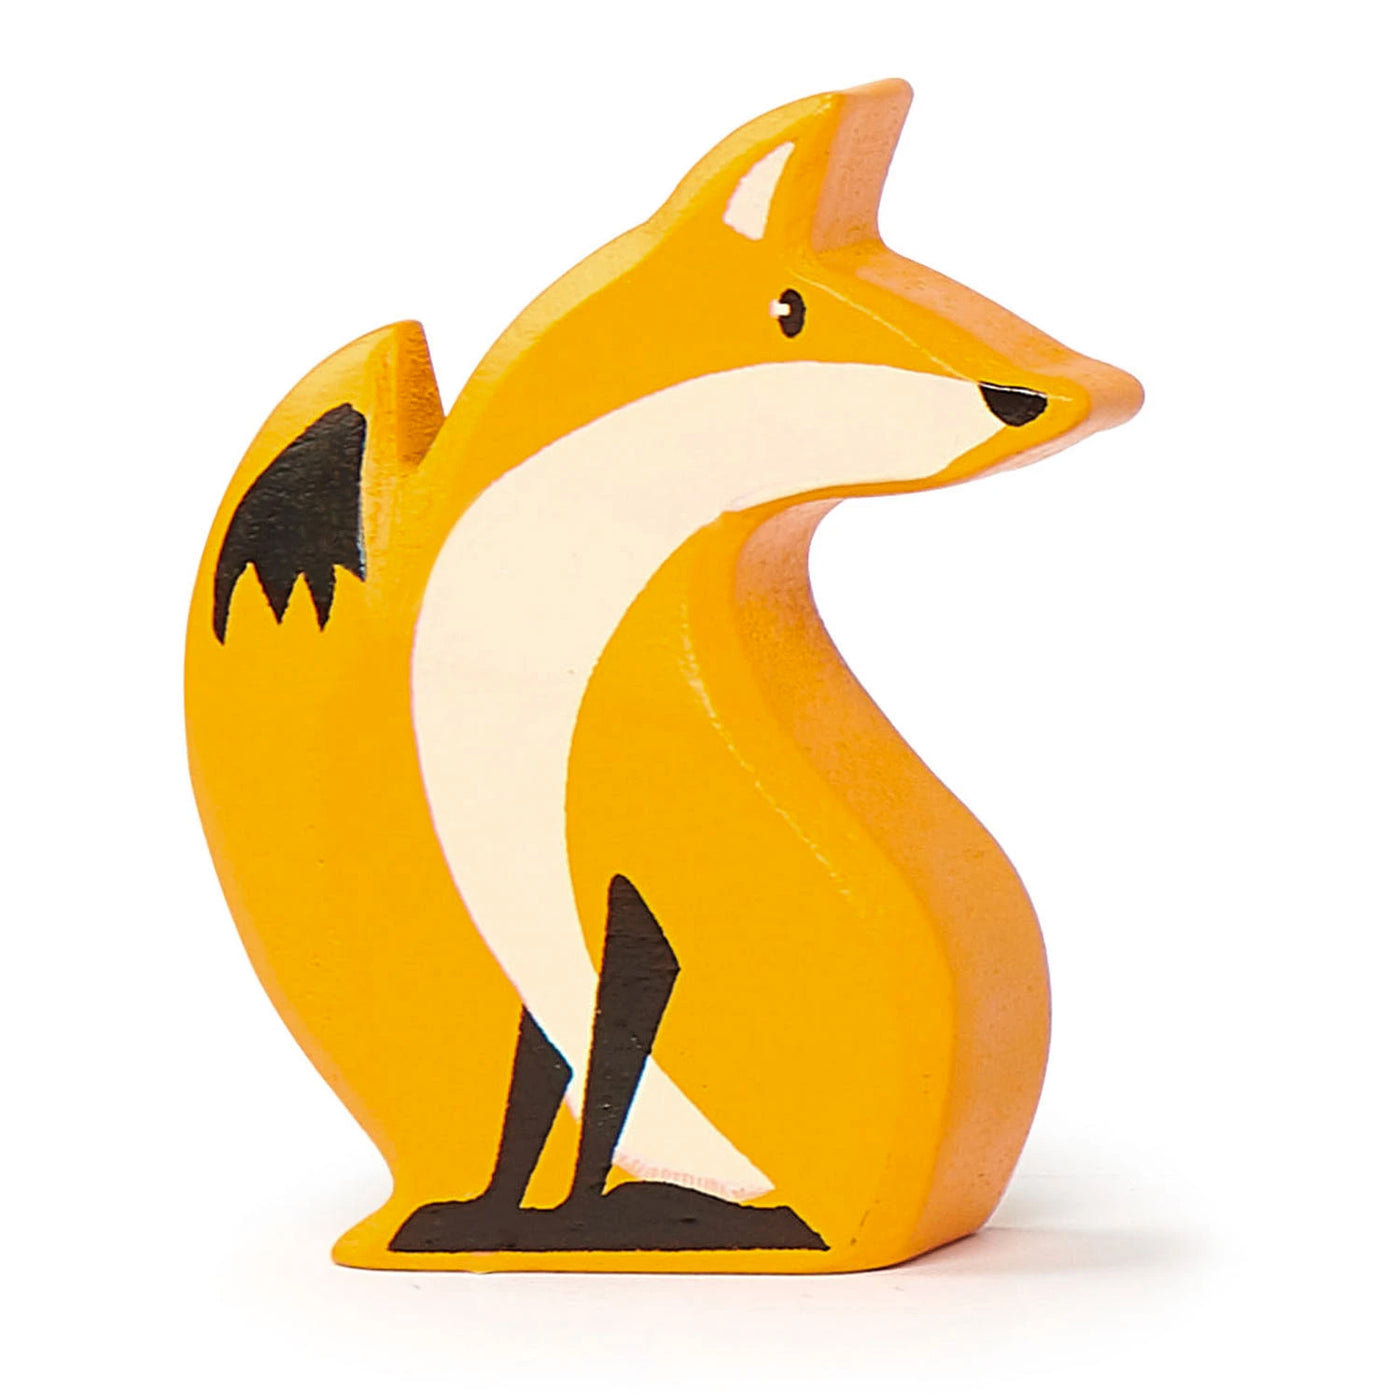 Wooden Woodland Fox toy for kids made of eco-friendly wood